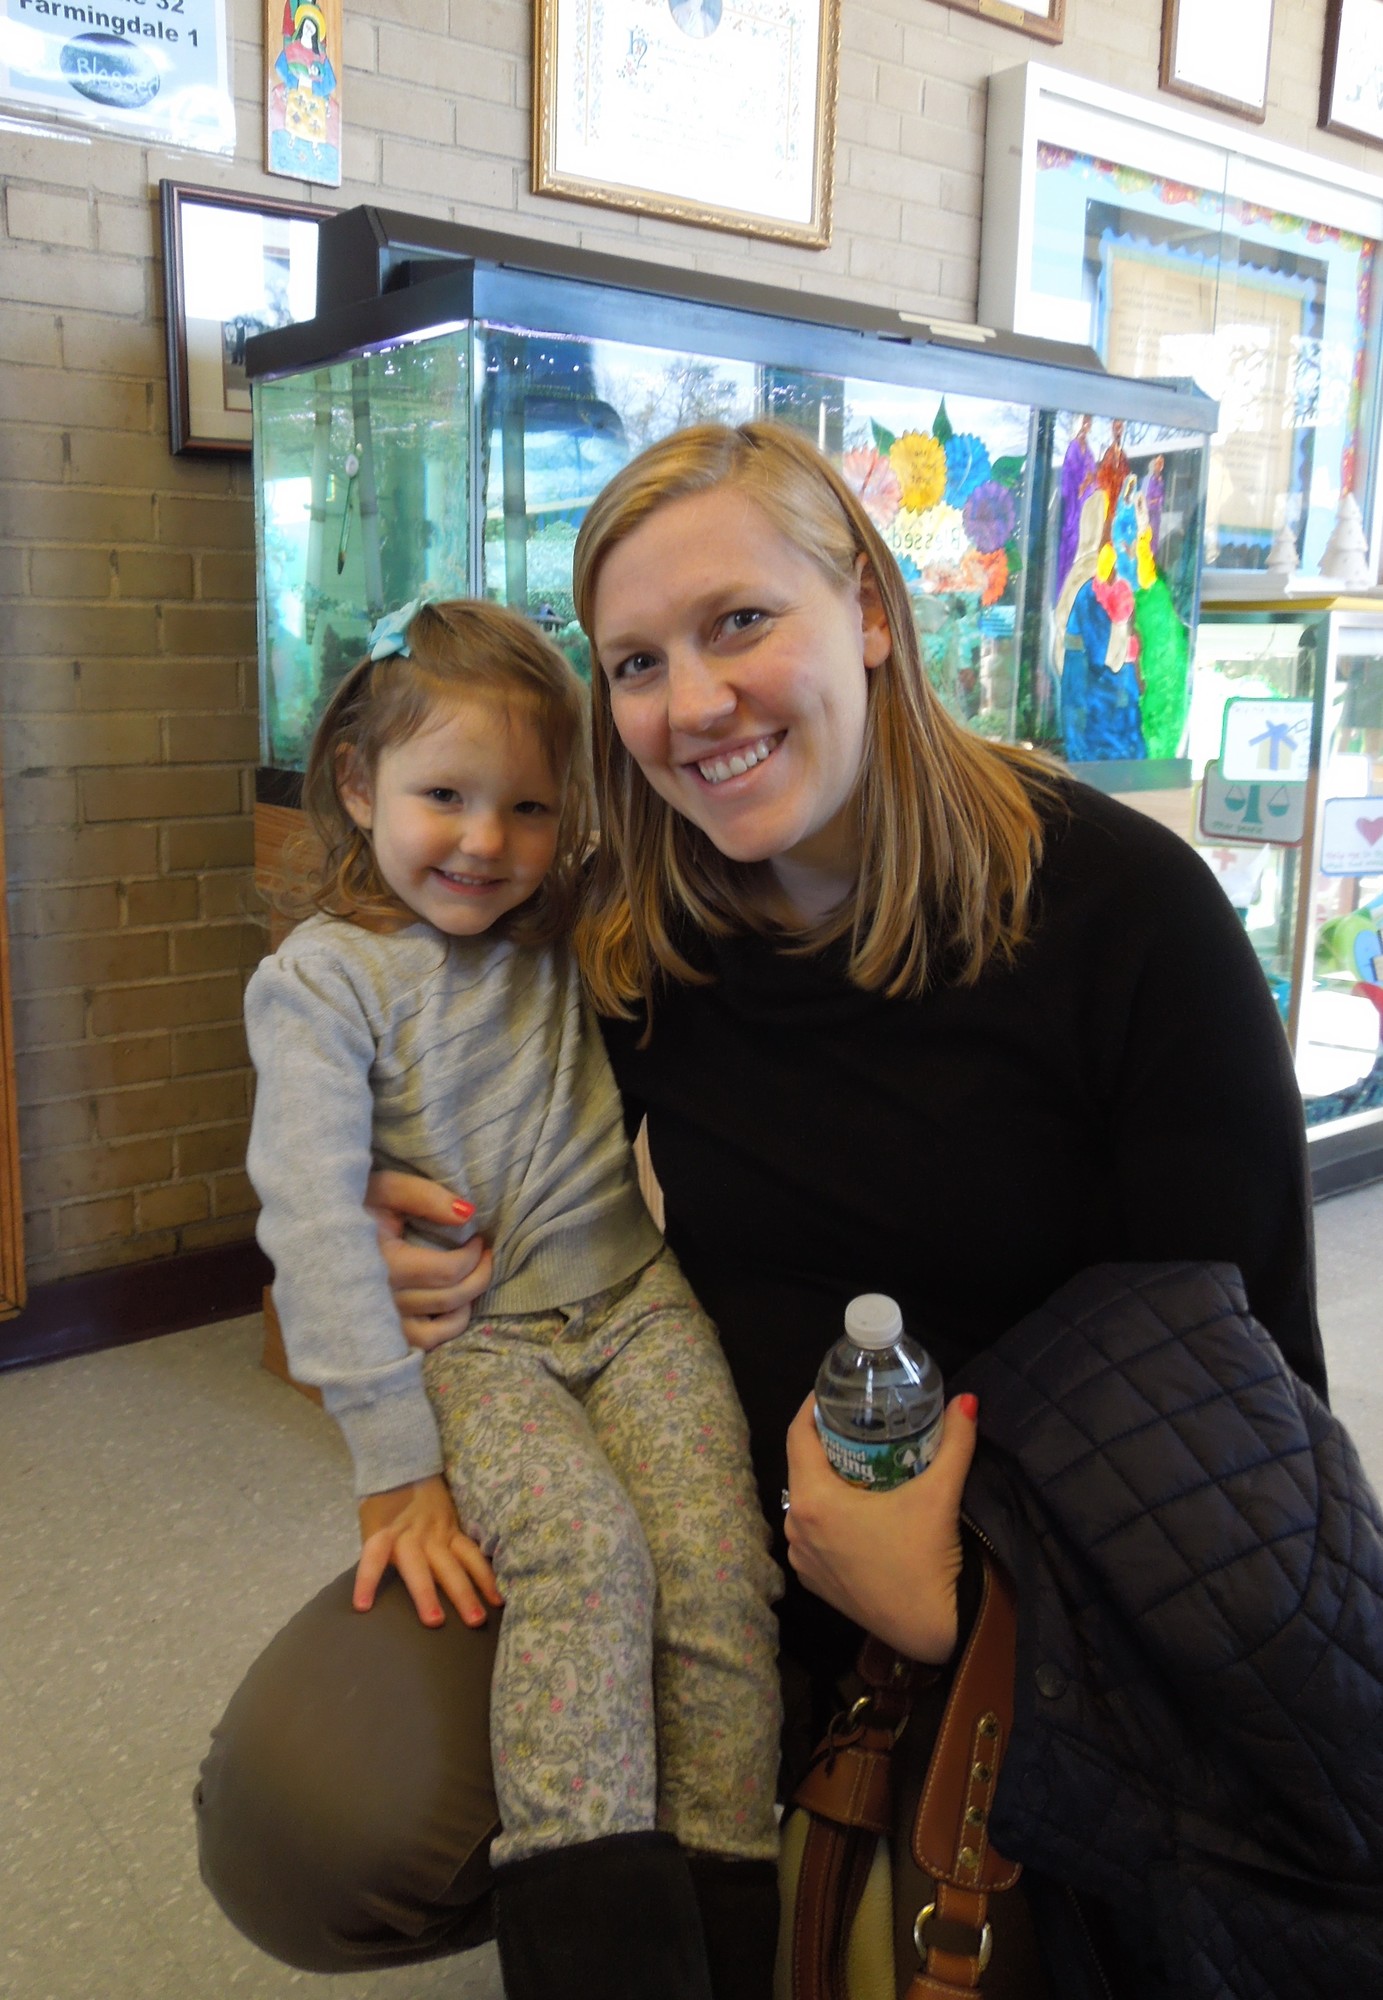 Laura Caddick-Wade and her daughter, Avery, toured the school.